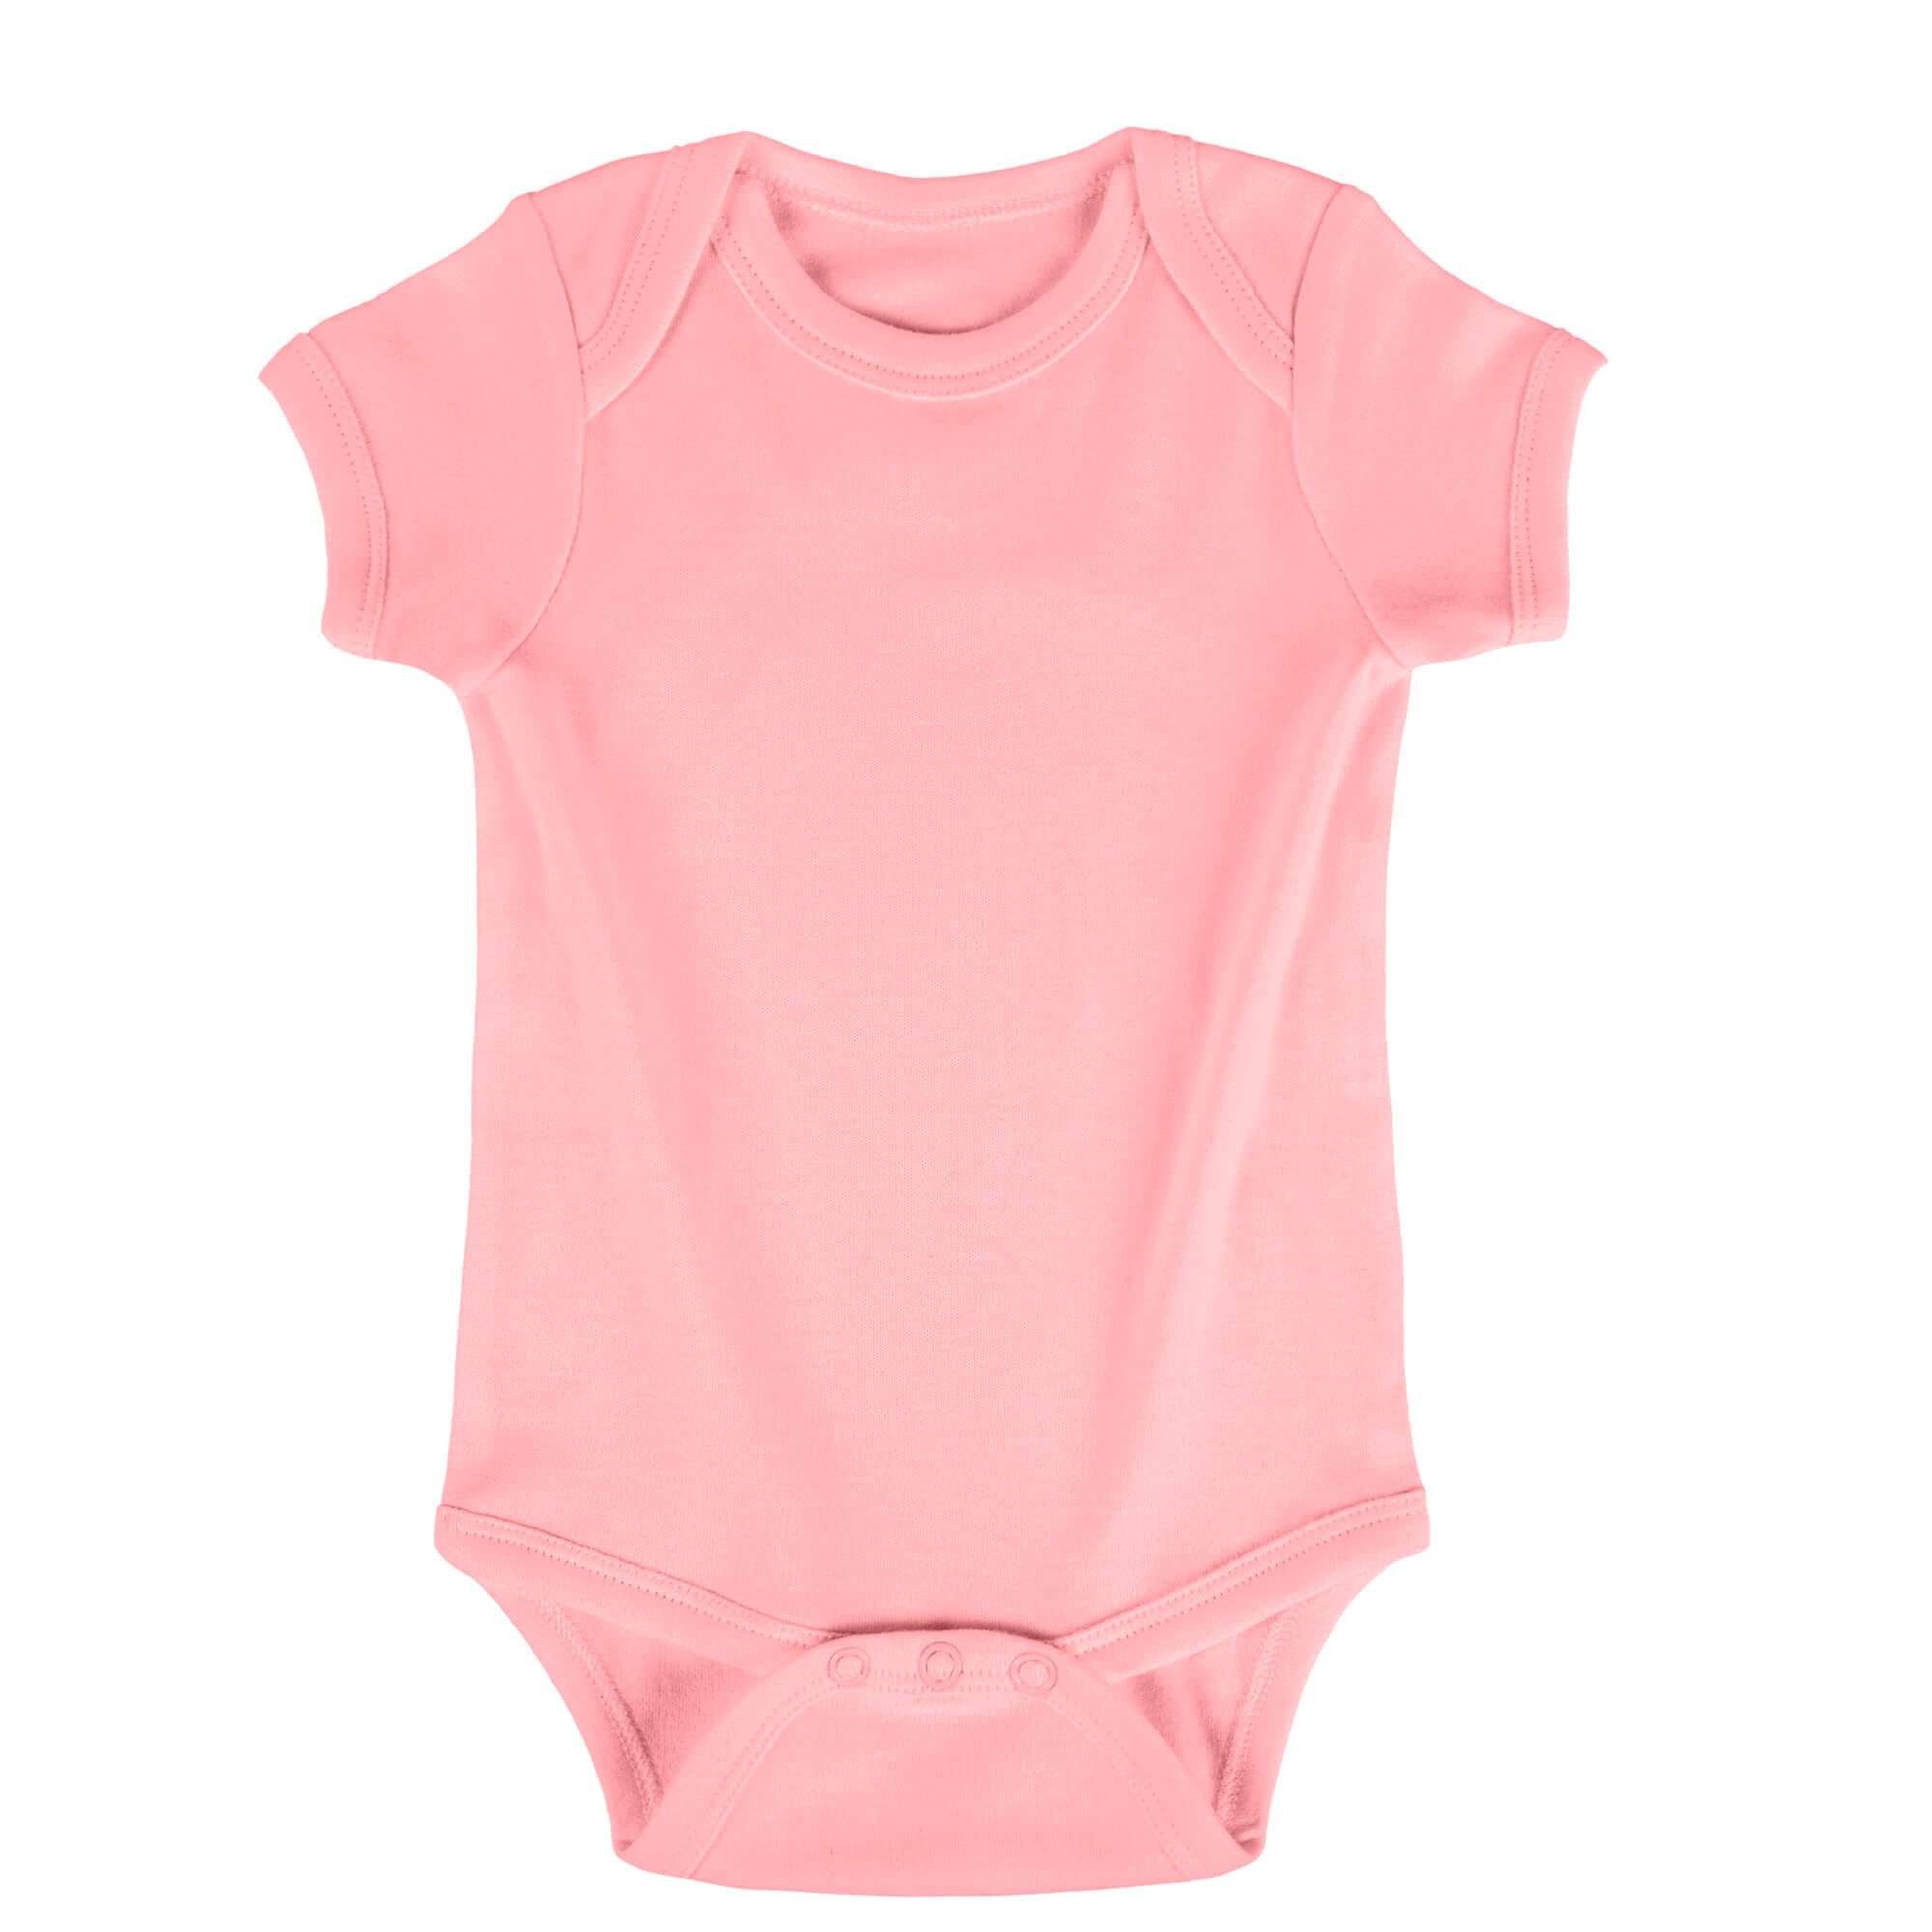 pink color number #75, onesie color selection, and color display.